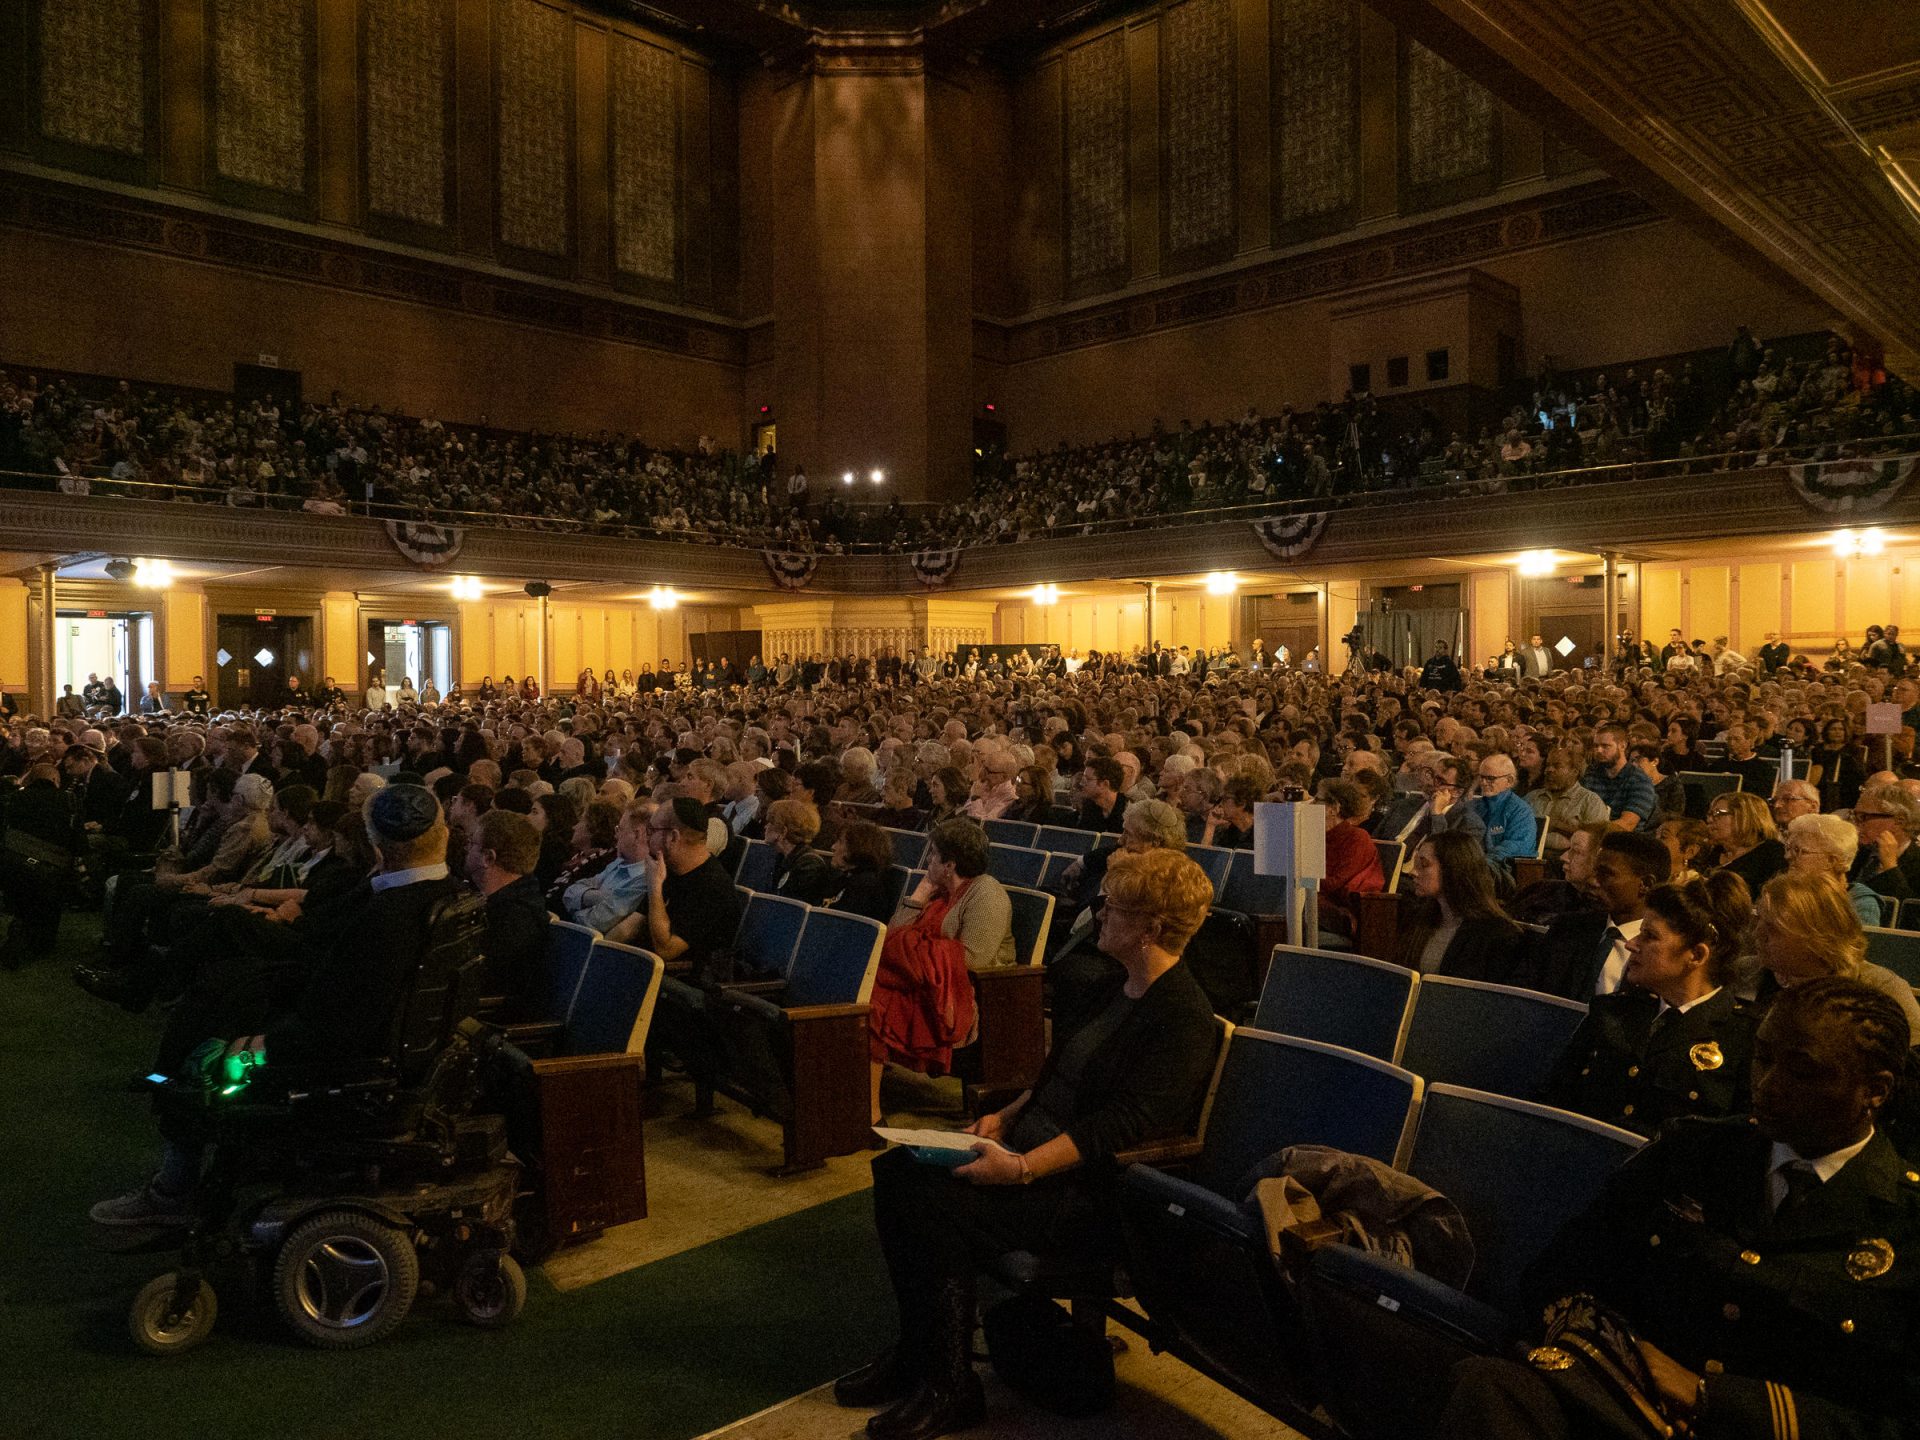 Community members gathered at Soldiers and Sailors Memorial Hall for remembrance of the eleven victims of the Tree of Life shooting on October 27, 2019 in Pittsburgh, Pennsylvania.